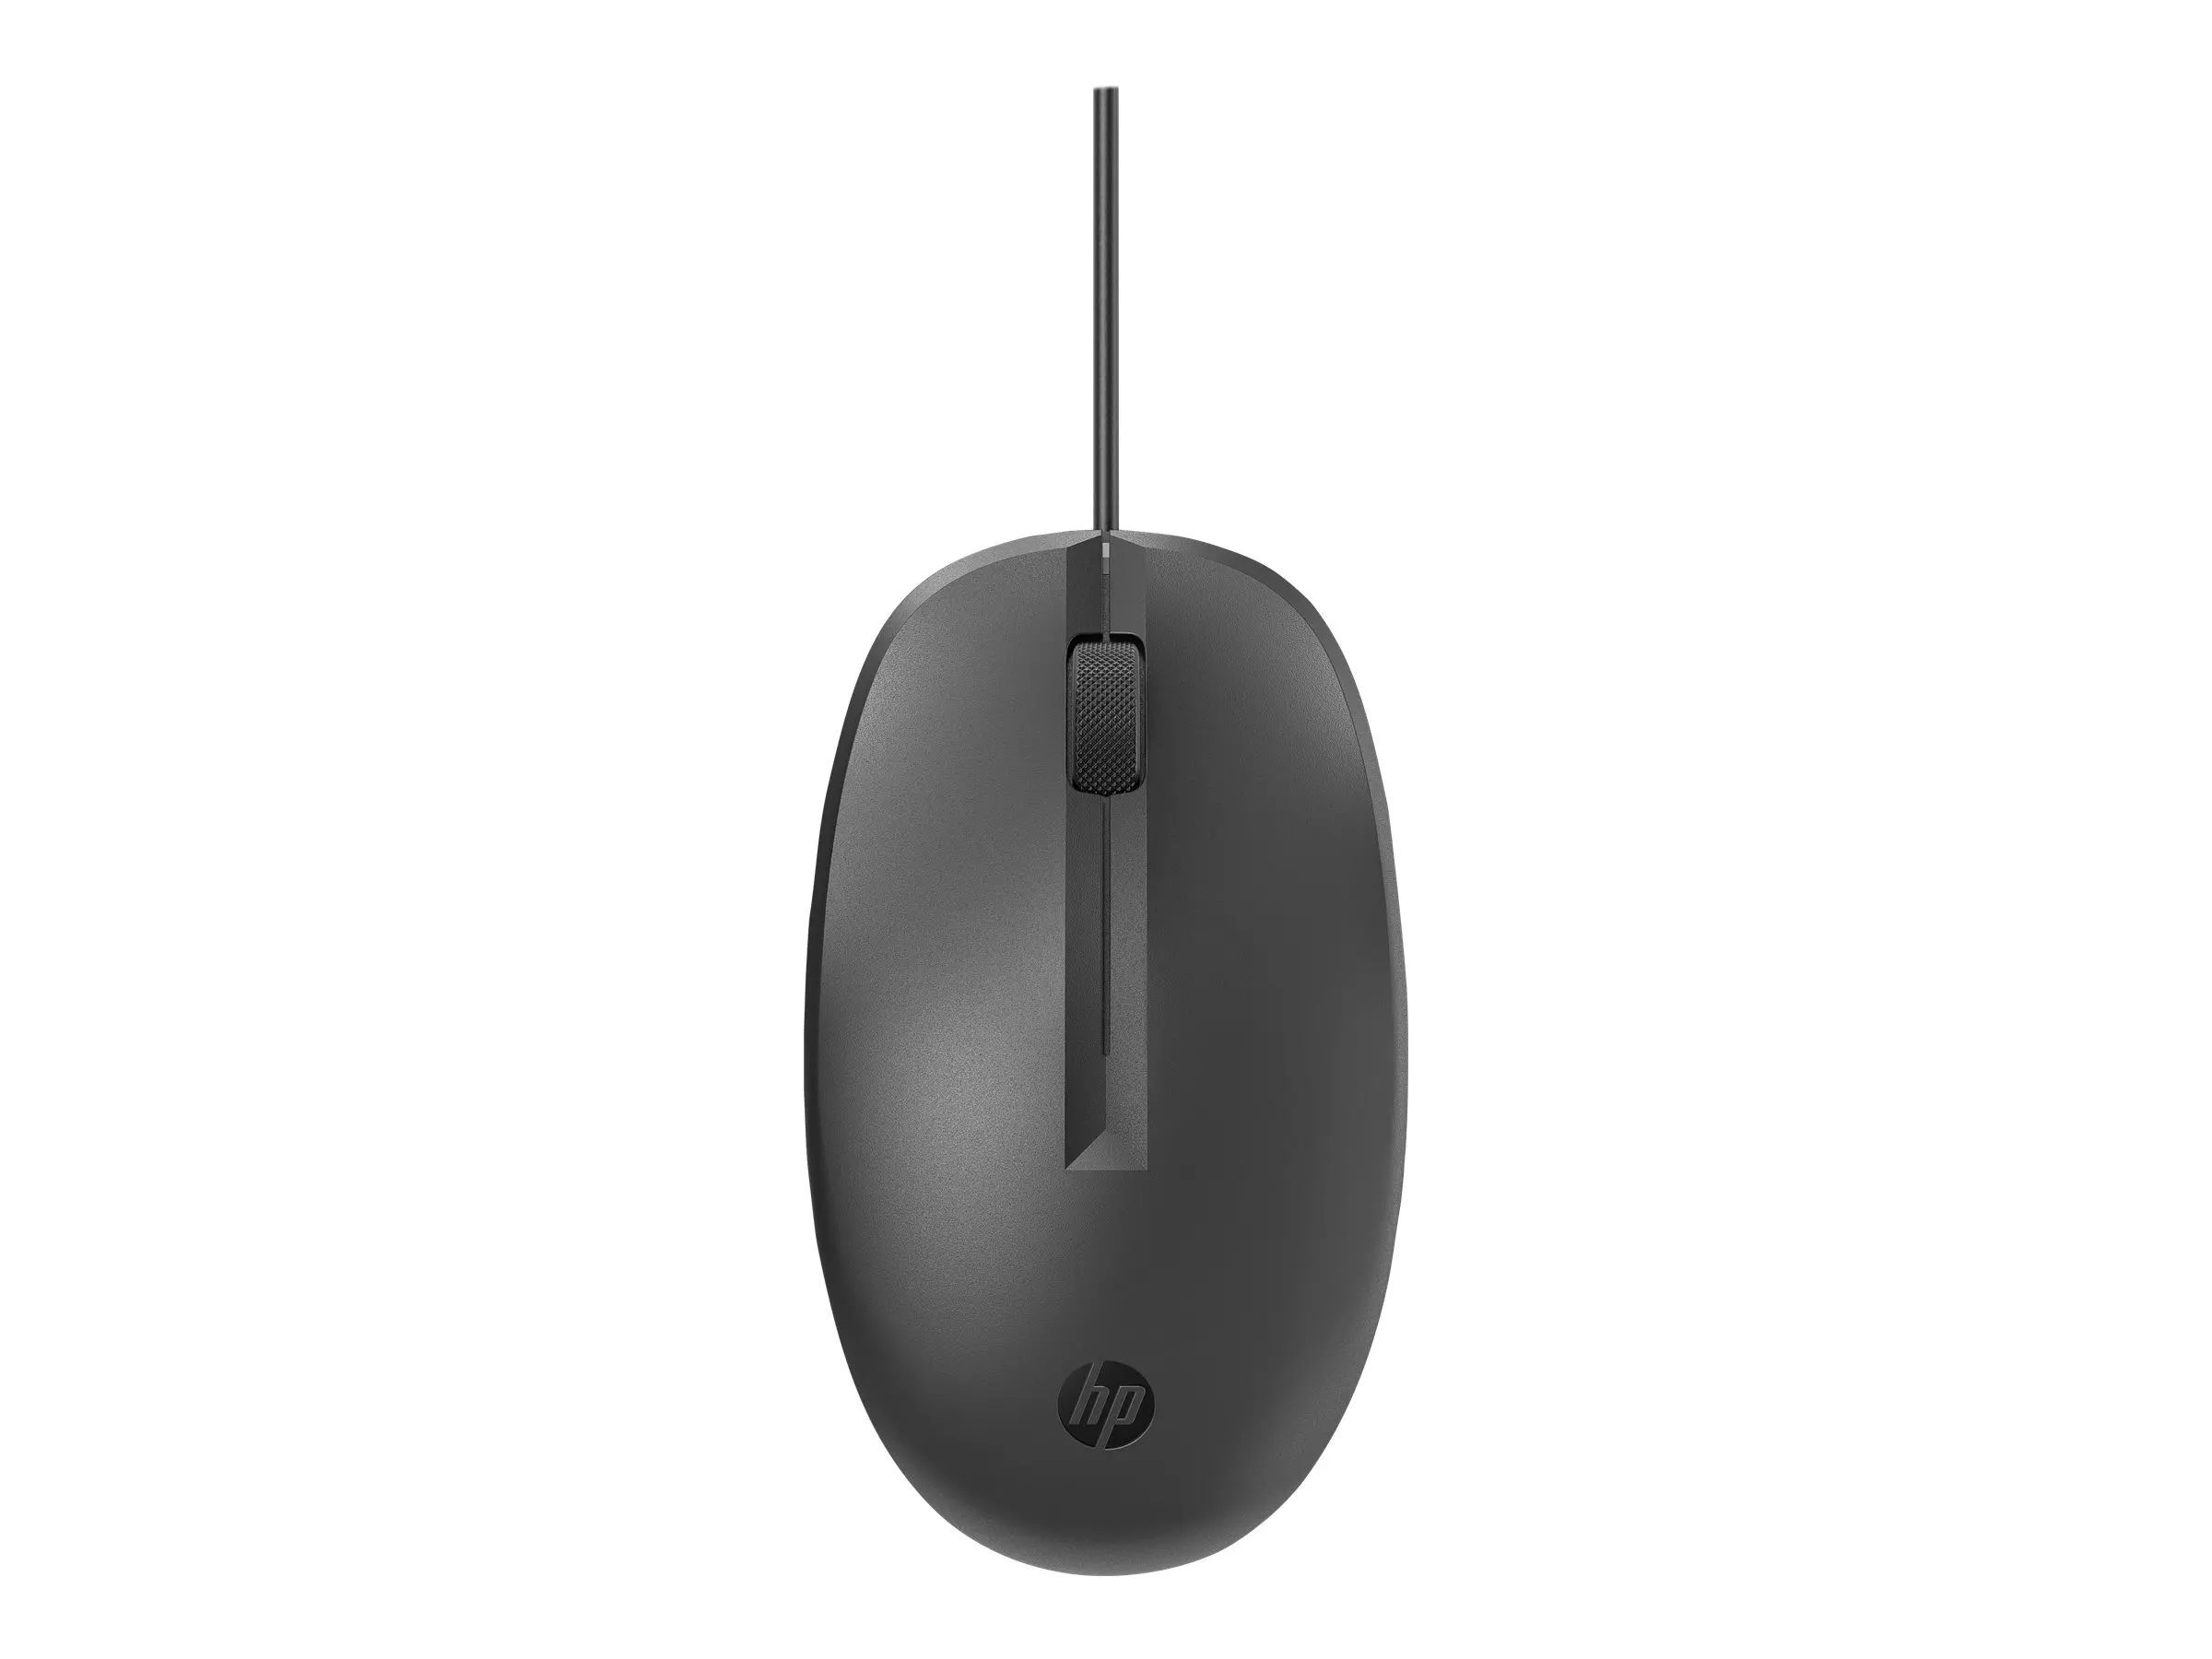 HP 128 laser wired mouse - image 1